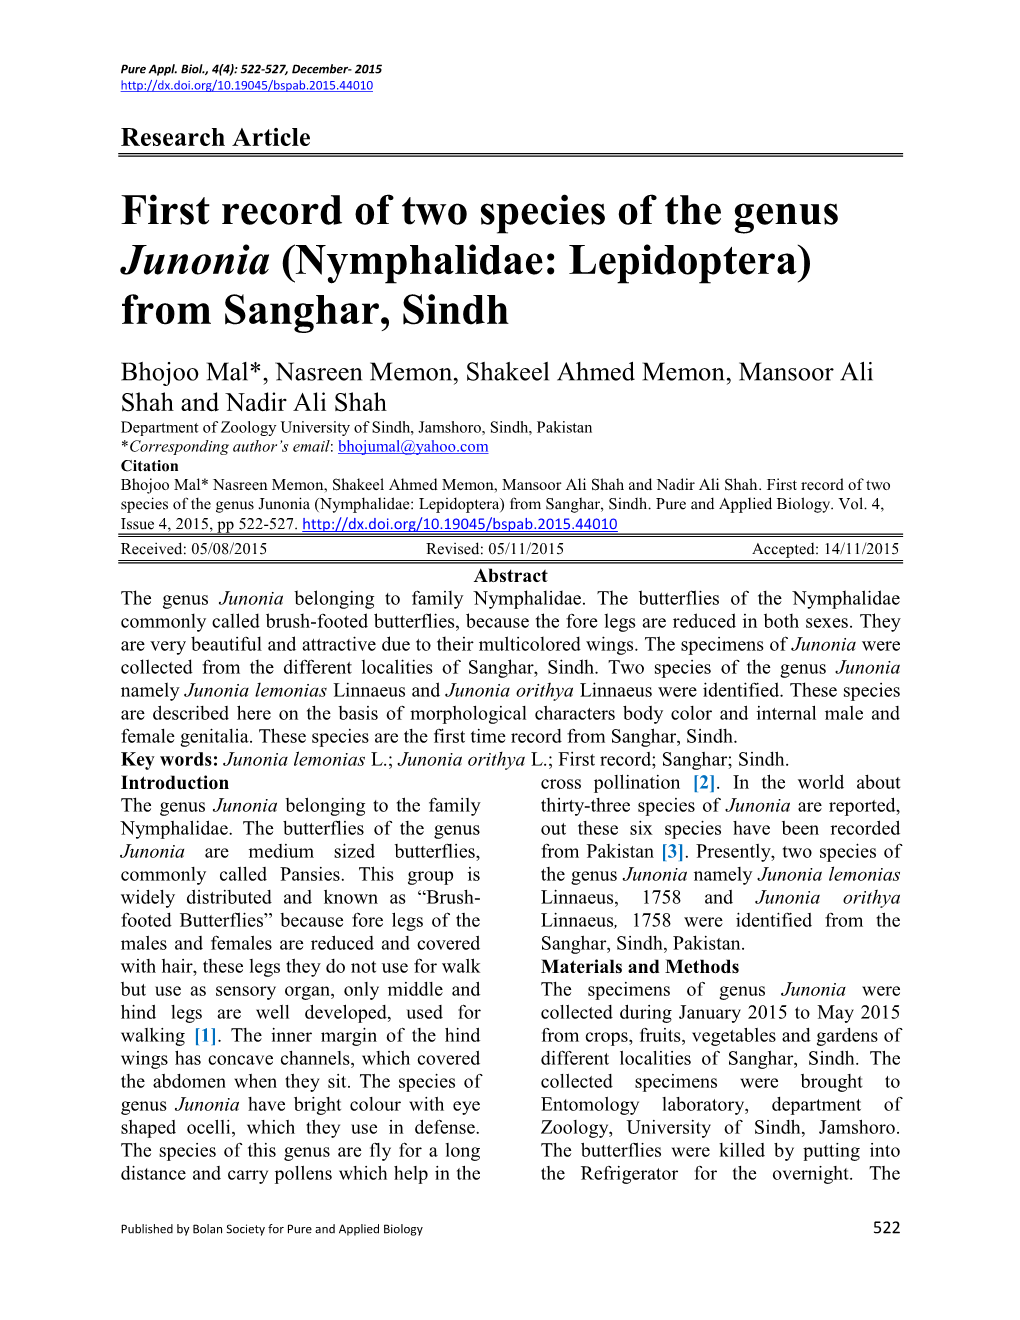 First Record of Two Species of the Genus Junonia (Nymphalidae: Lepidoptera) from Sanghar, Sindh